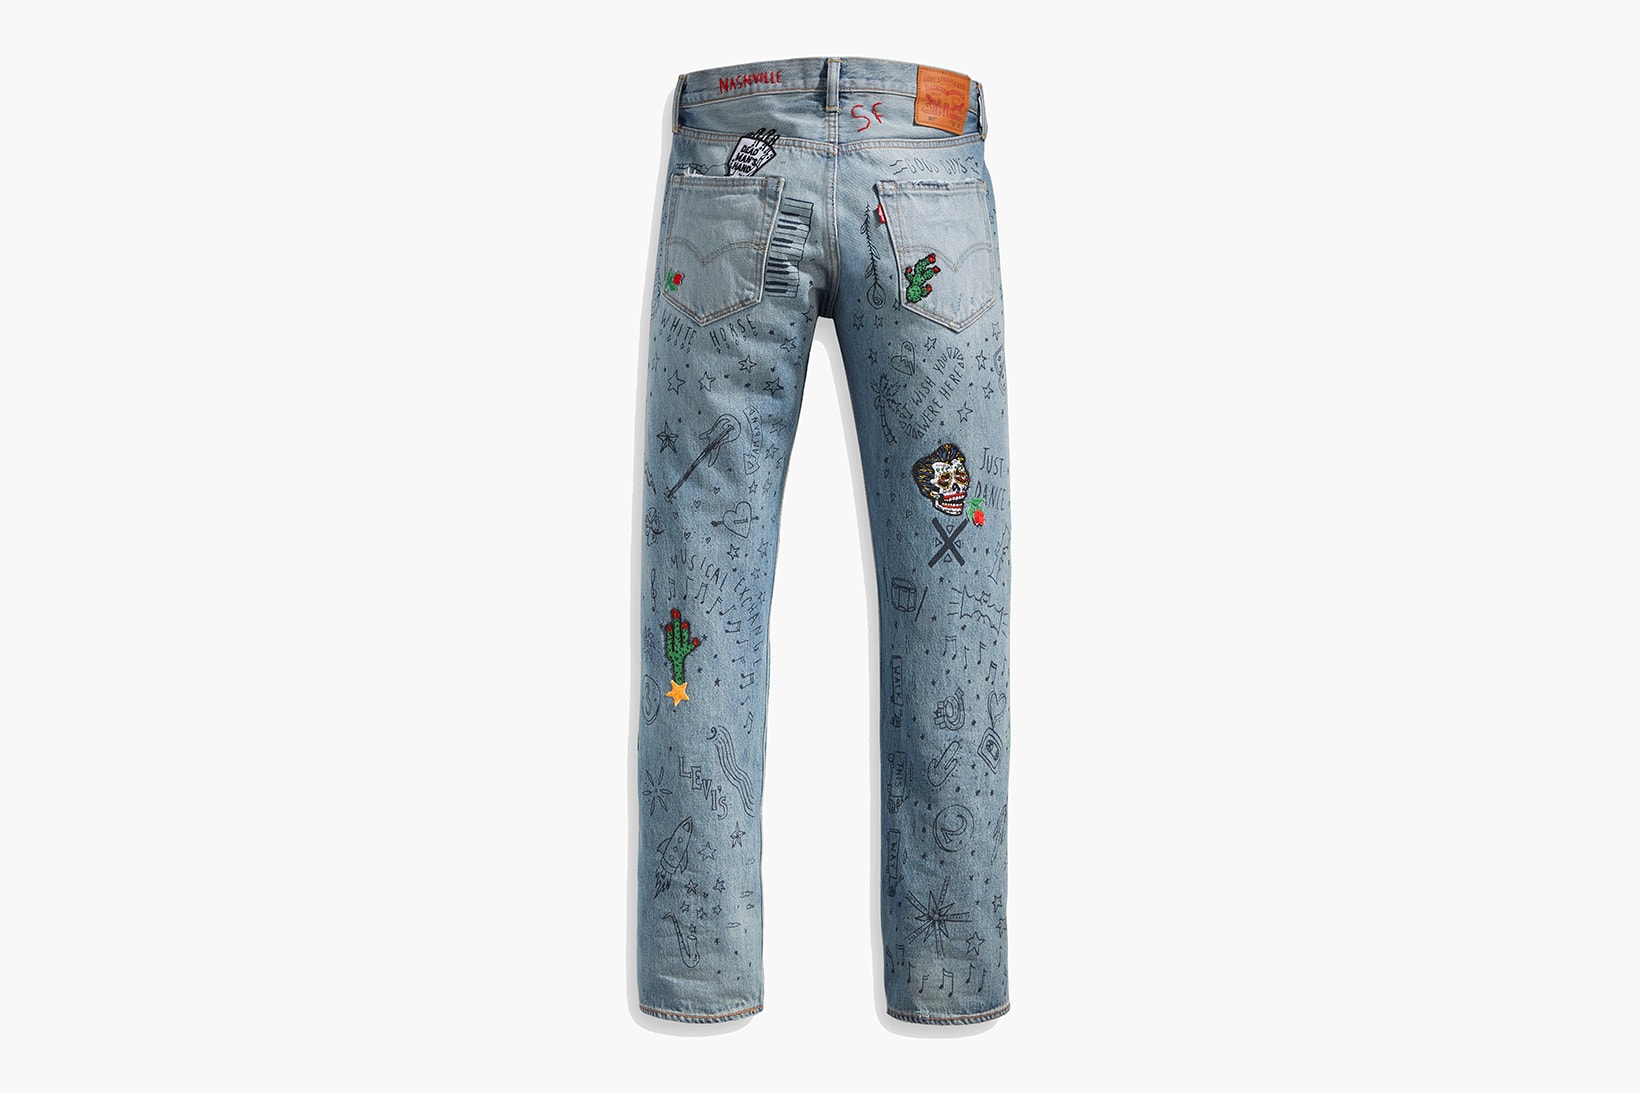 Levi's Release Capsule Collection to Celebrate 501 Day Jeans